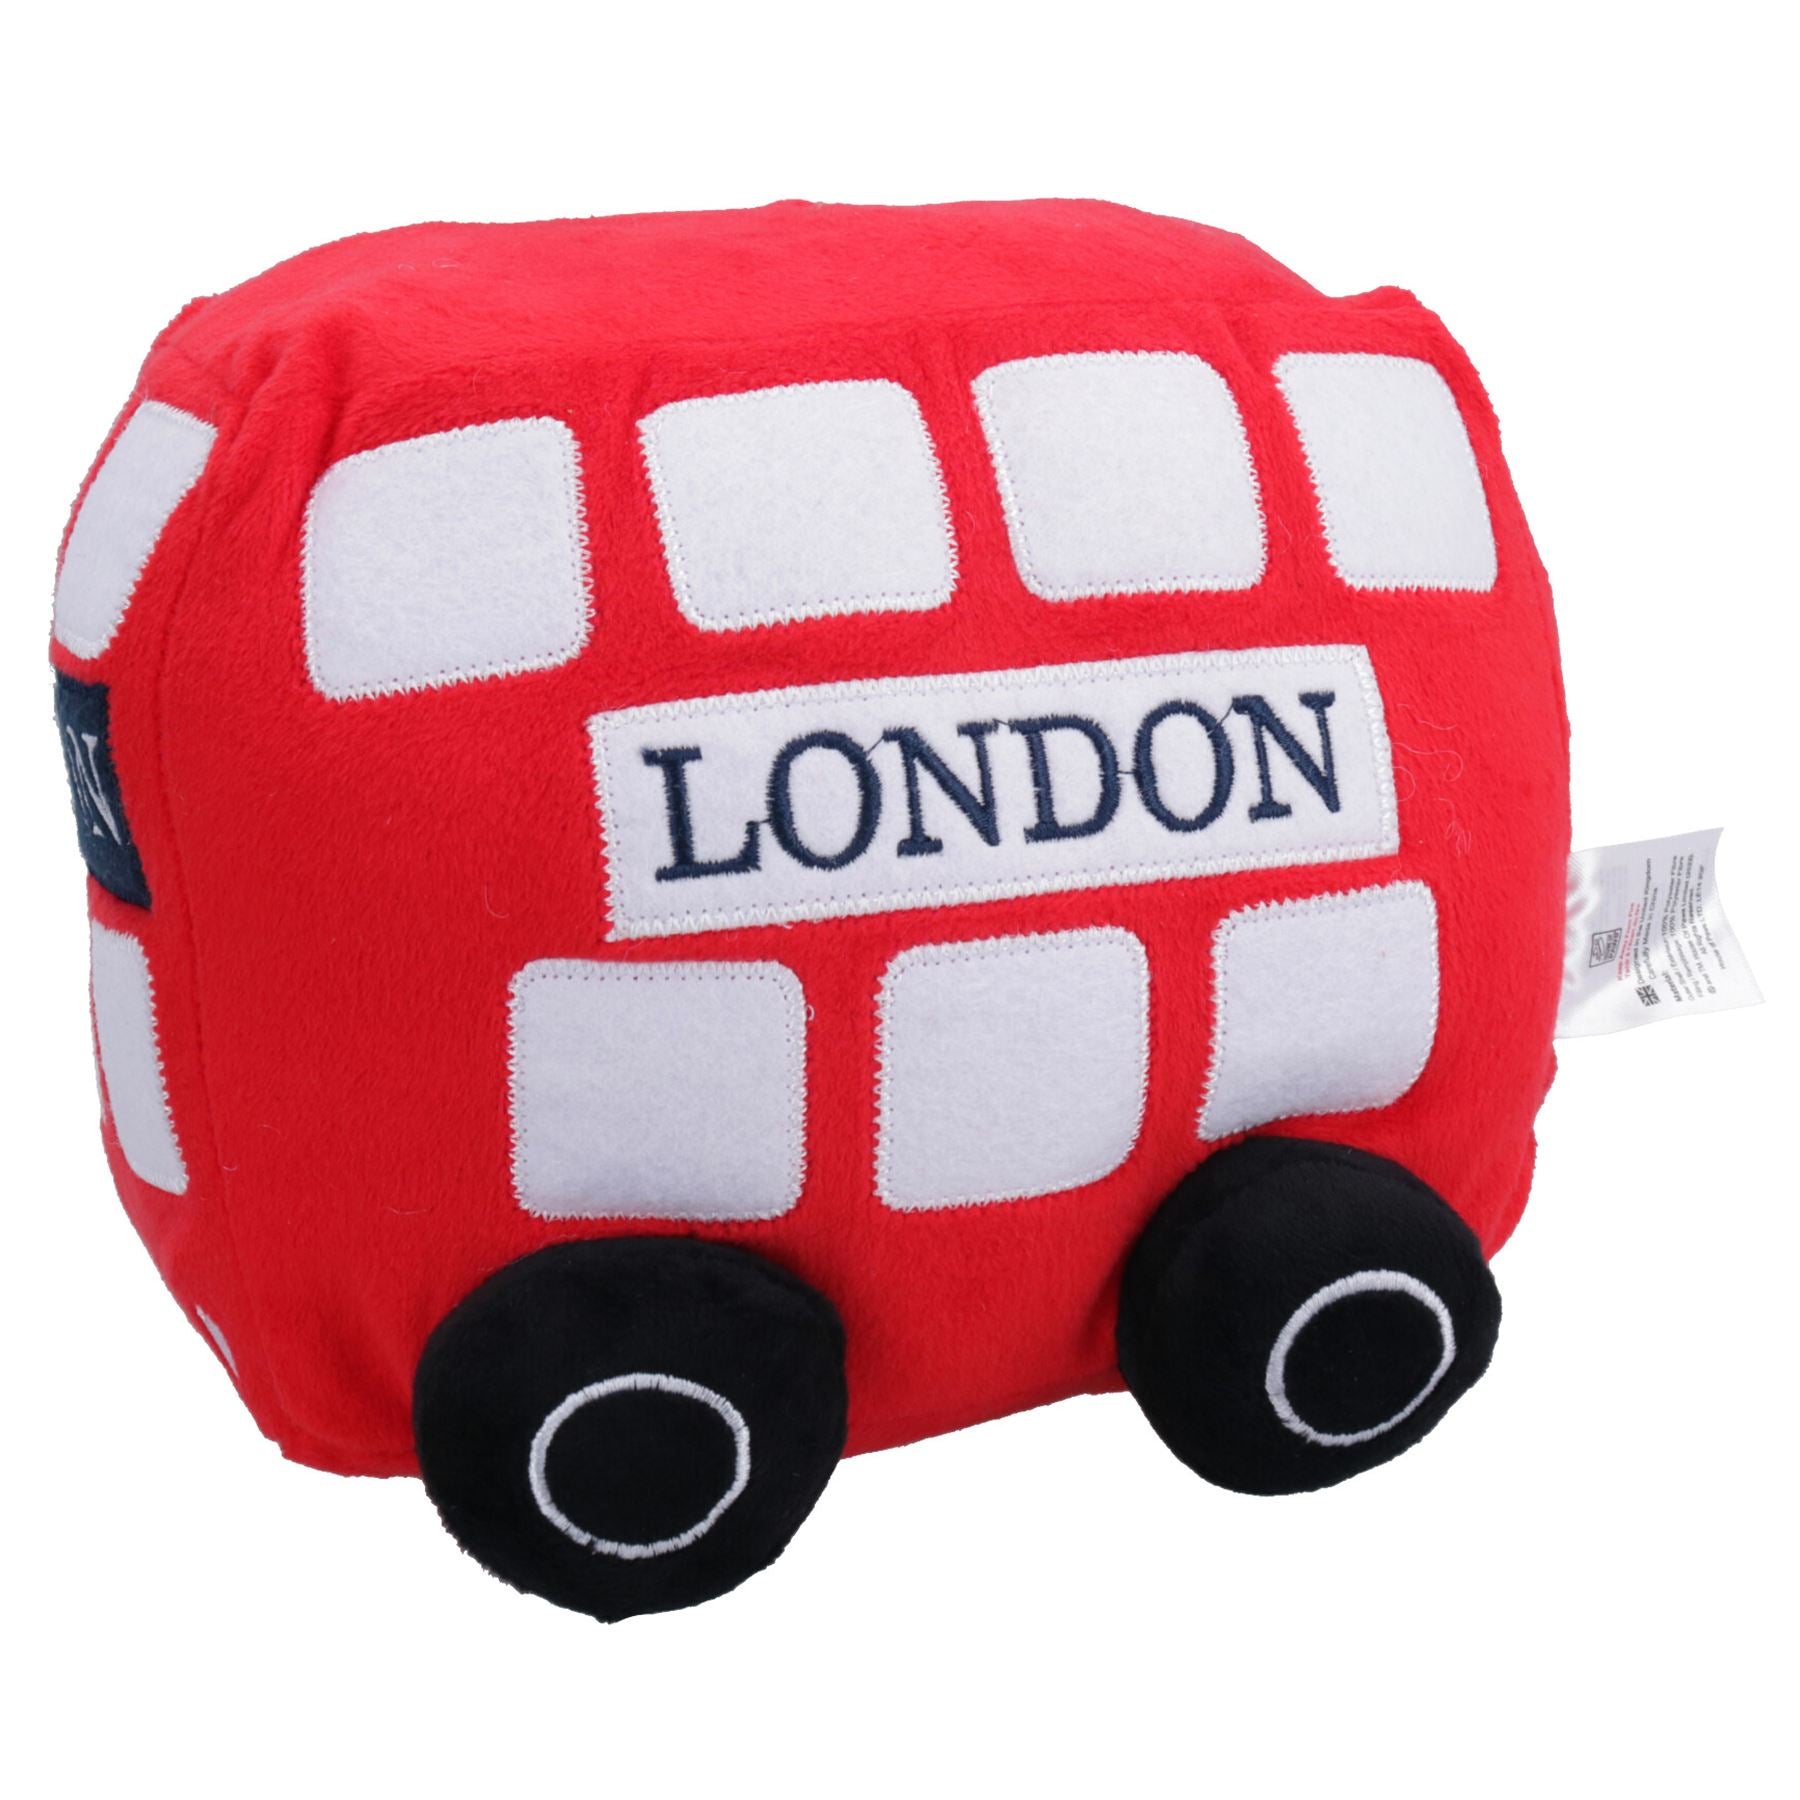 Plush London Bus Dog Toy Dog Puppy Play Toy With Squeak Gift 16x21cm